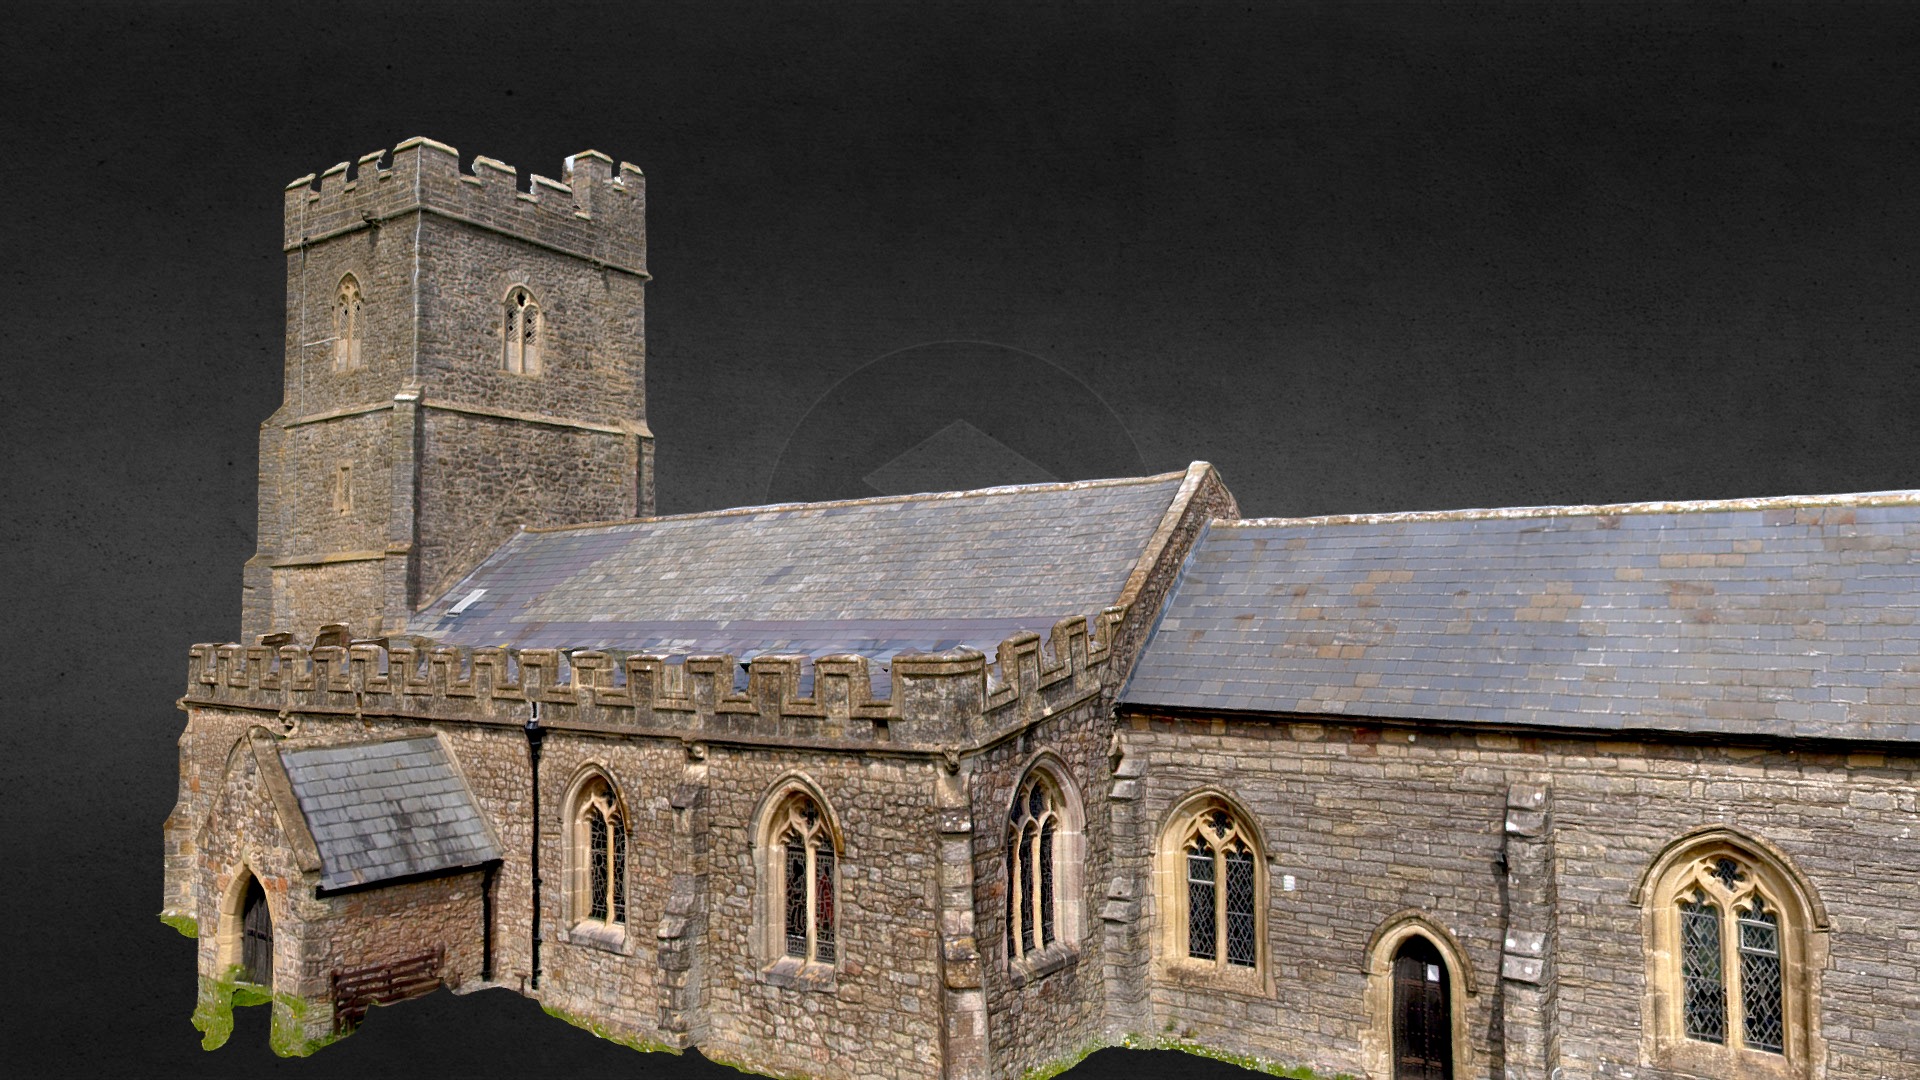 3D model St. Mary’s Church, Berrow - This is a 3D model of the St. Mary's Church, Berrow. The 3D model is about a stone building with a tower.